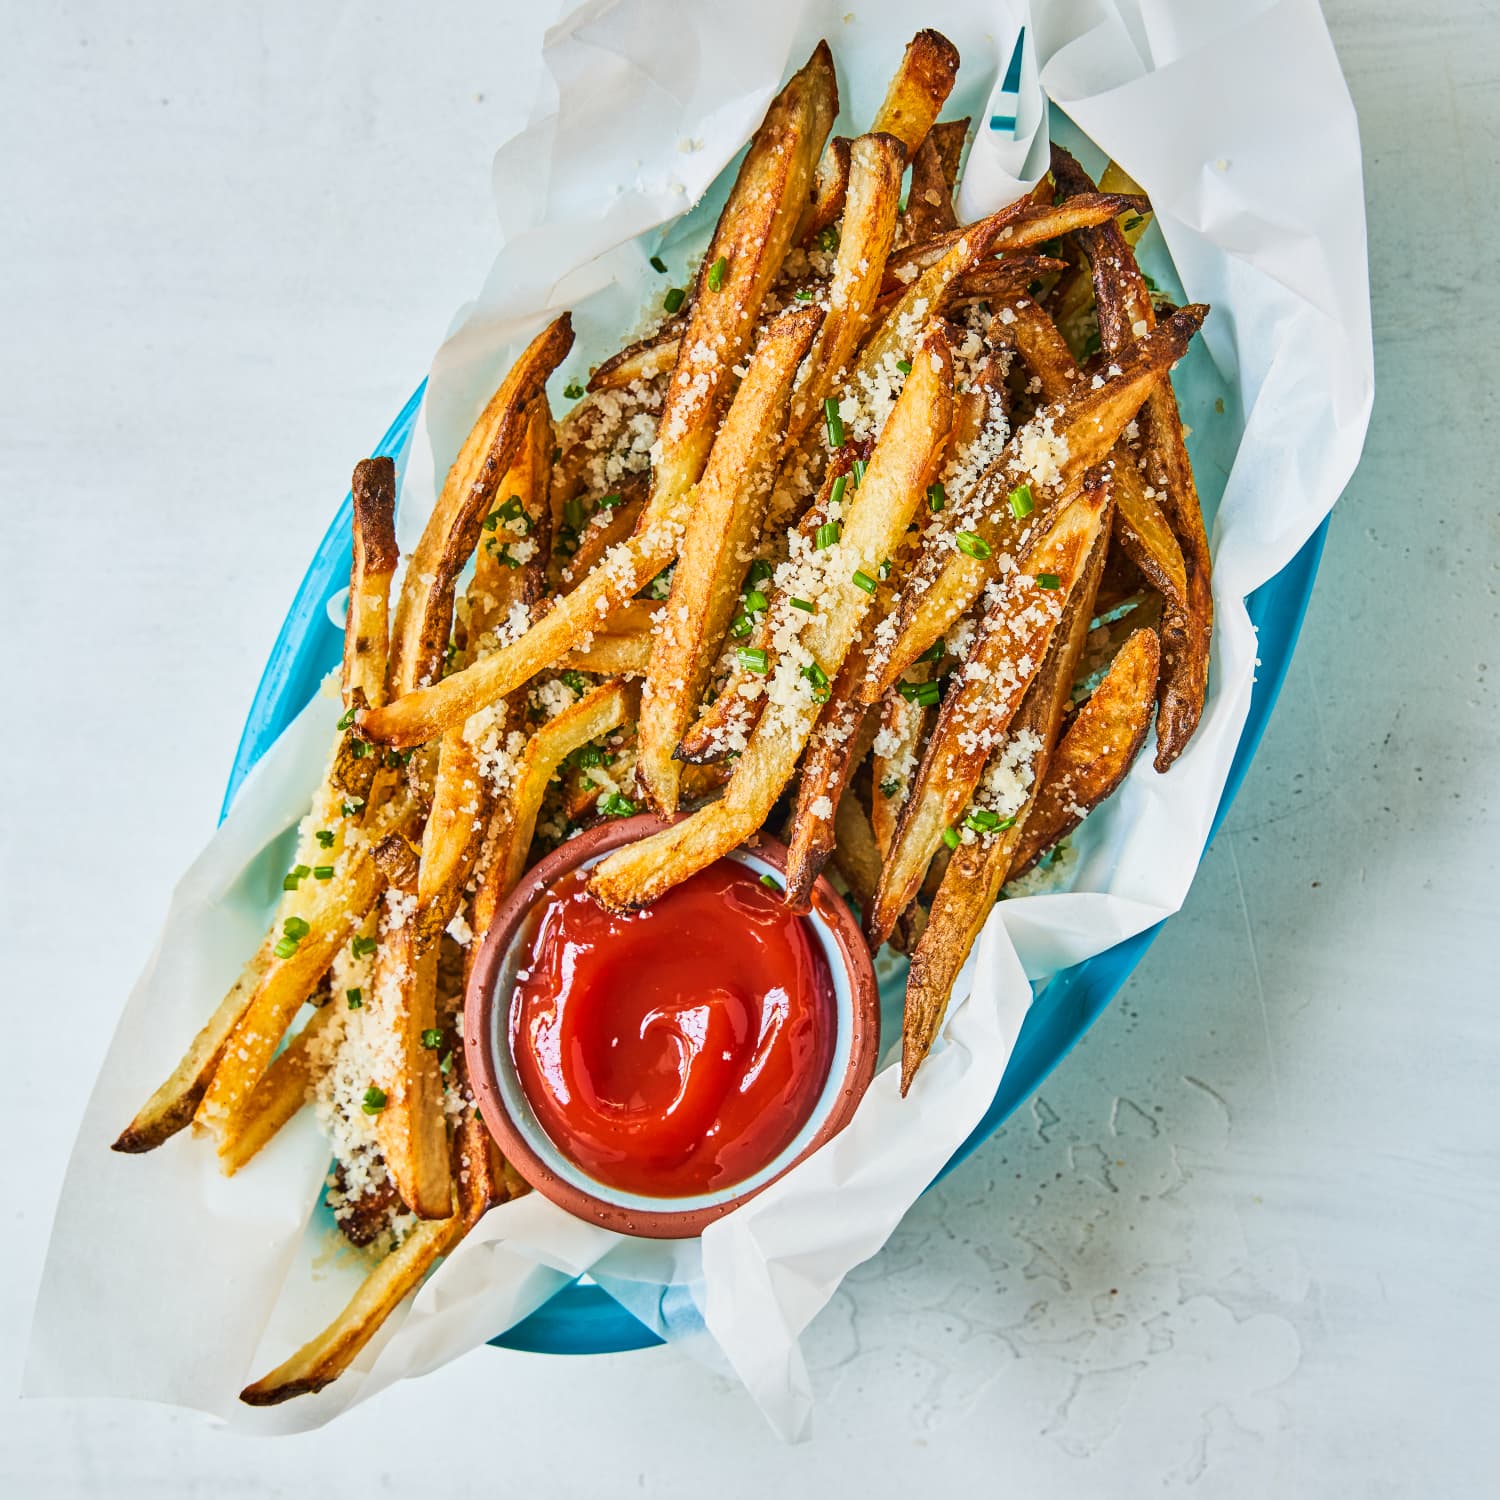 Truffle Fries Recipe (Baked Version with Garlic and Parmesan) | Kitchn